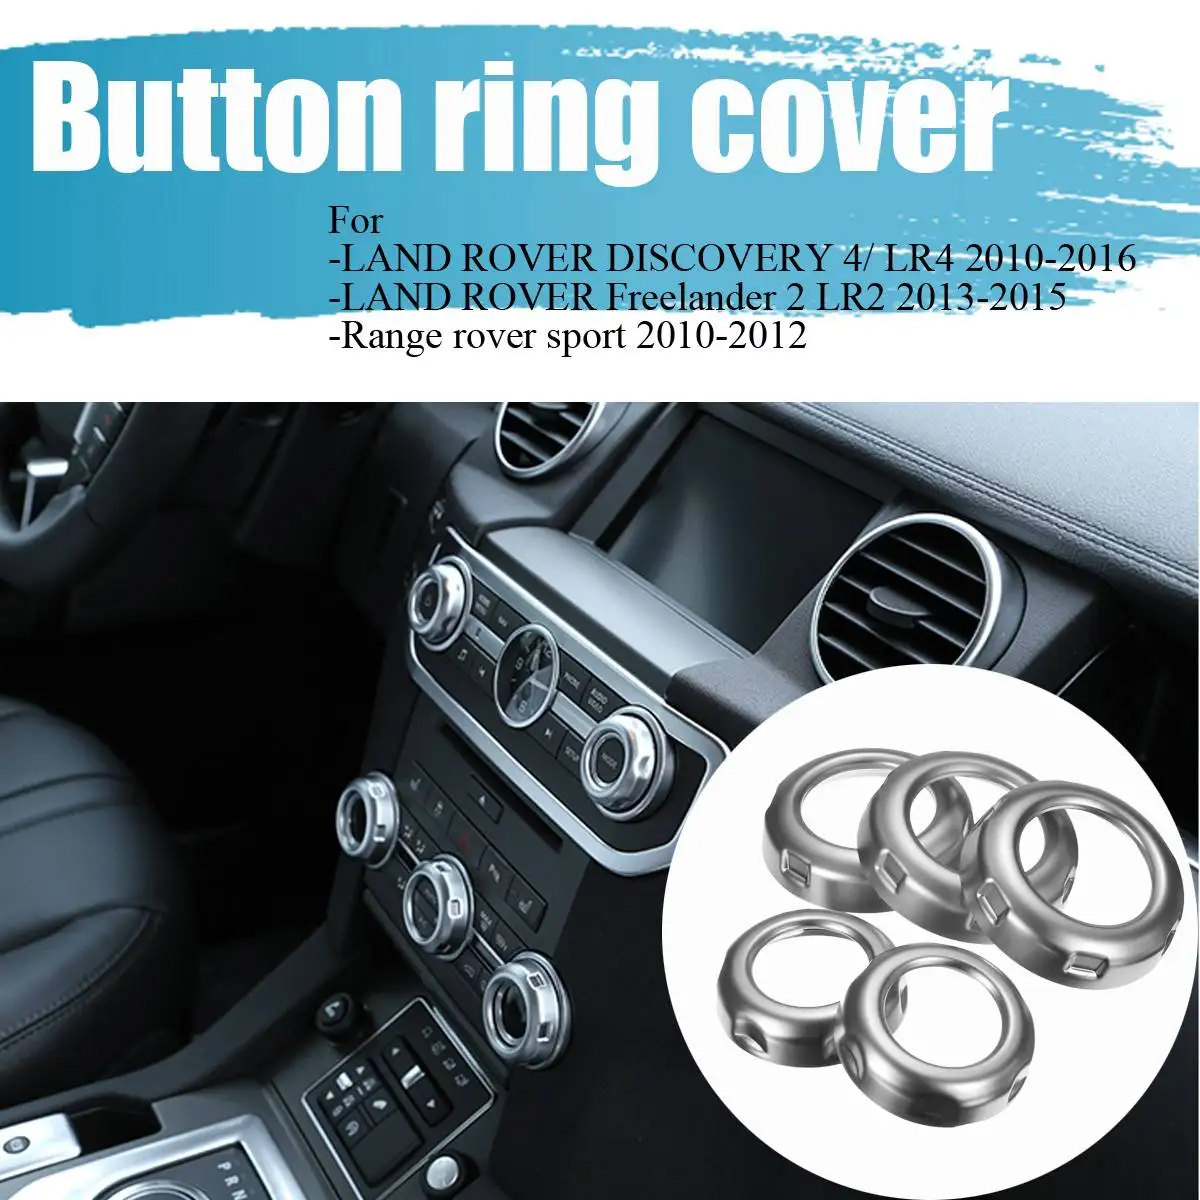 Piano Black Dingln 4pcs Bouton Volant Garniture for Cadre Fit Land Rover Range Rover//Discovery